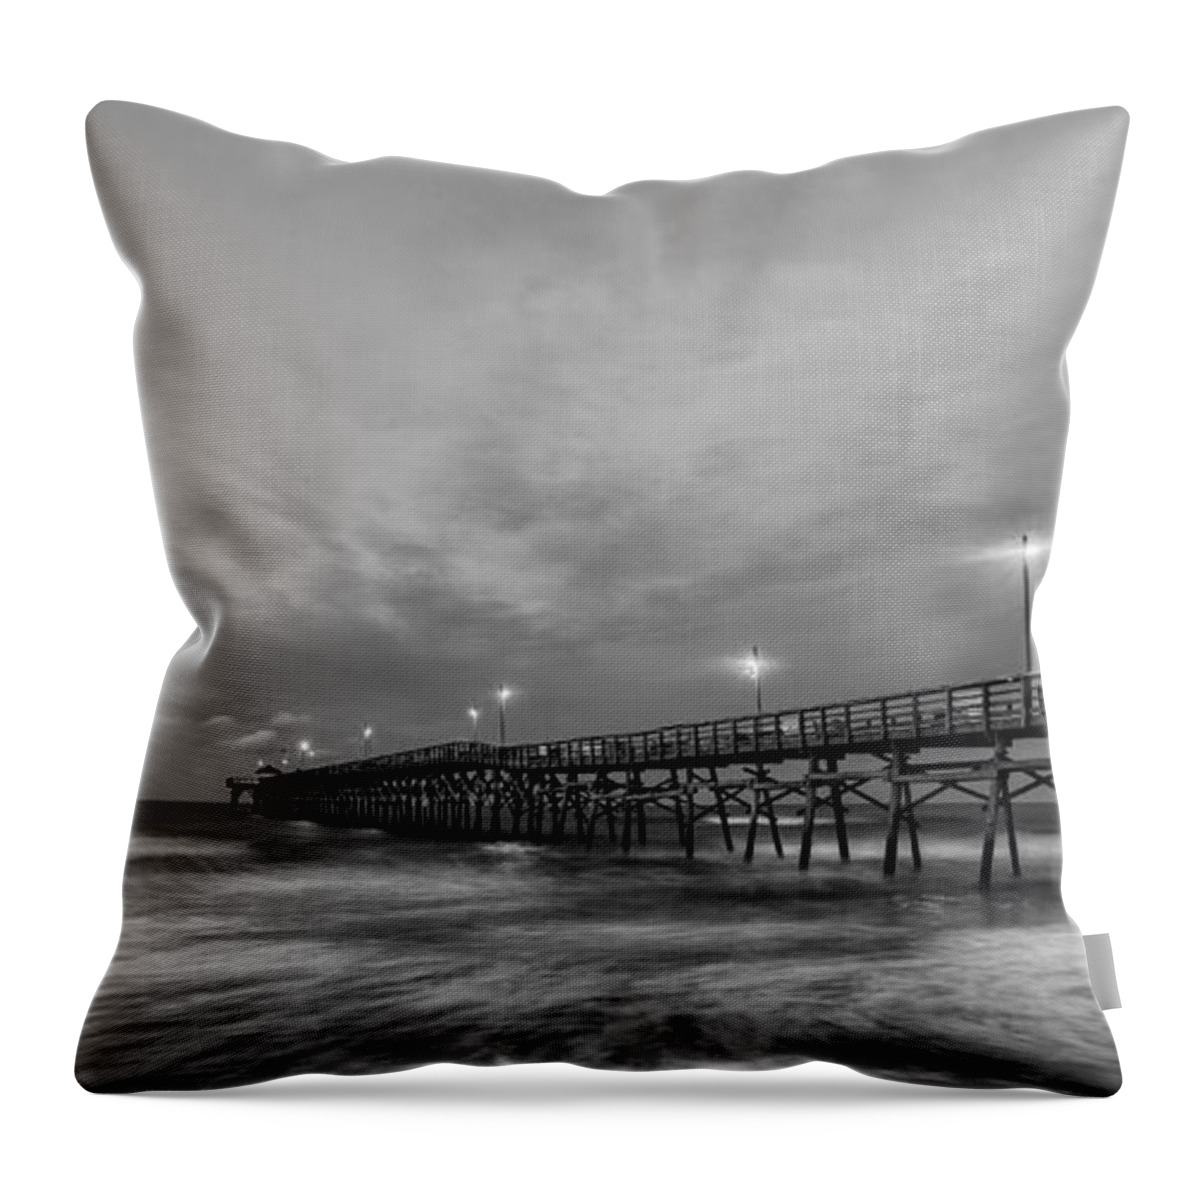 Oceancrestpier Throw Pillow featuring the photograph Ocean Crest Pier Sunrise by Nick Noble